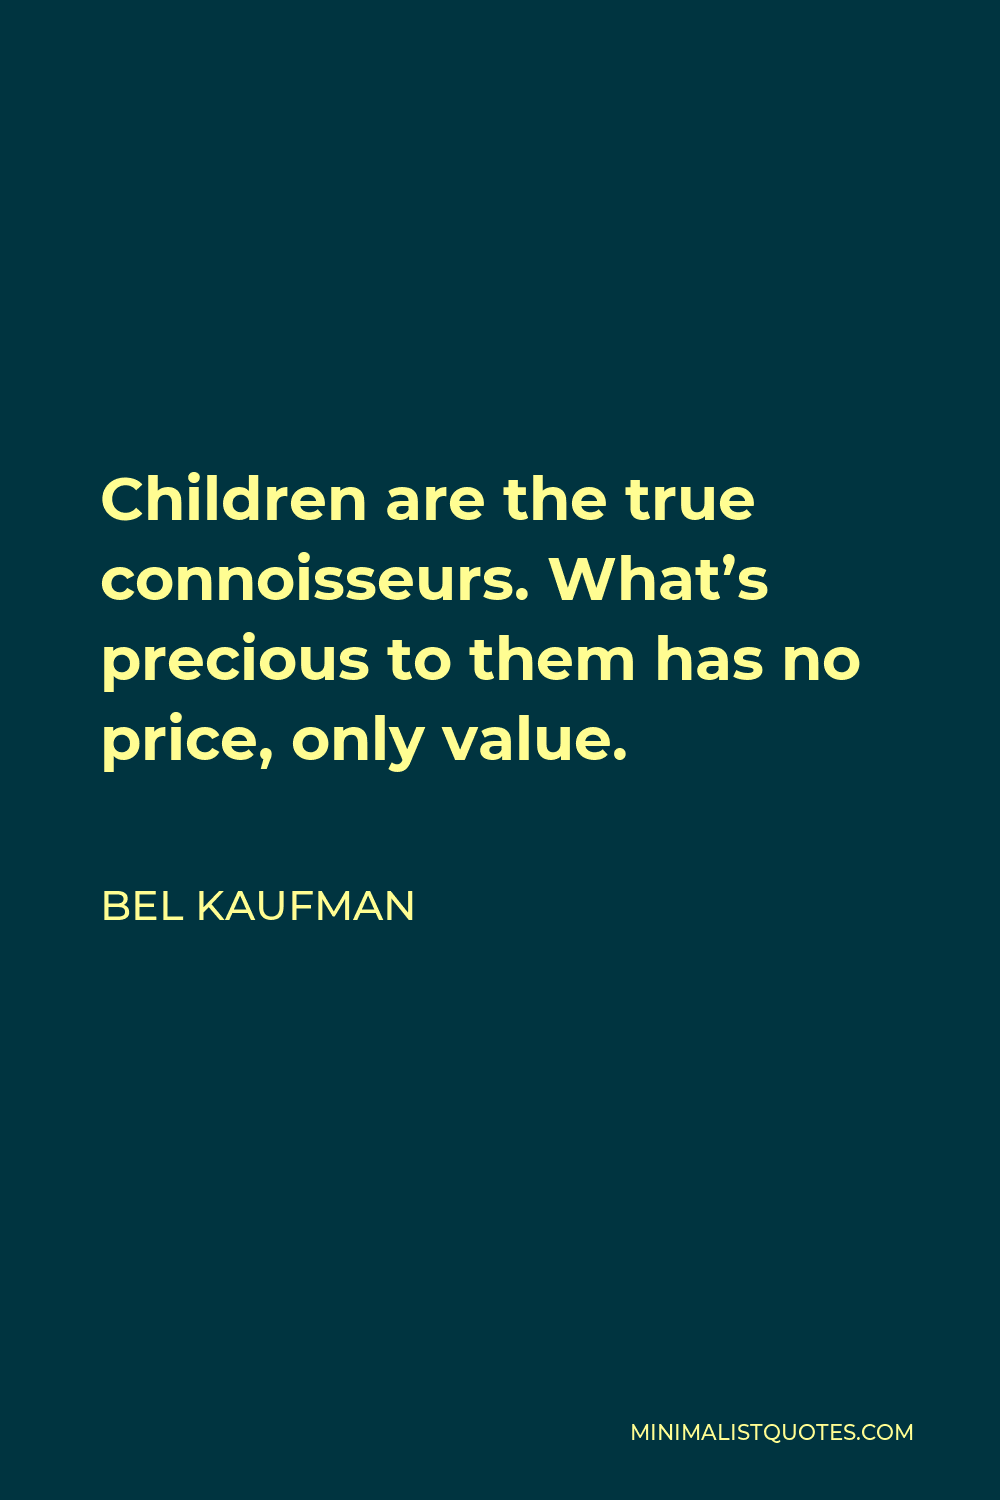 Bel Kaufman Quote - Children are the true connoisseurs. What’s precious to them has no price, only value.